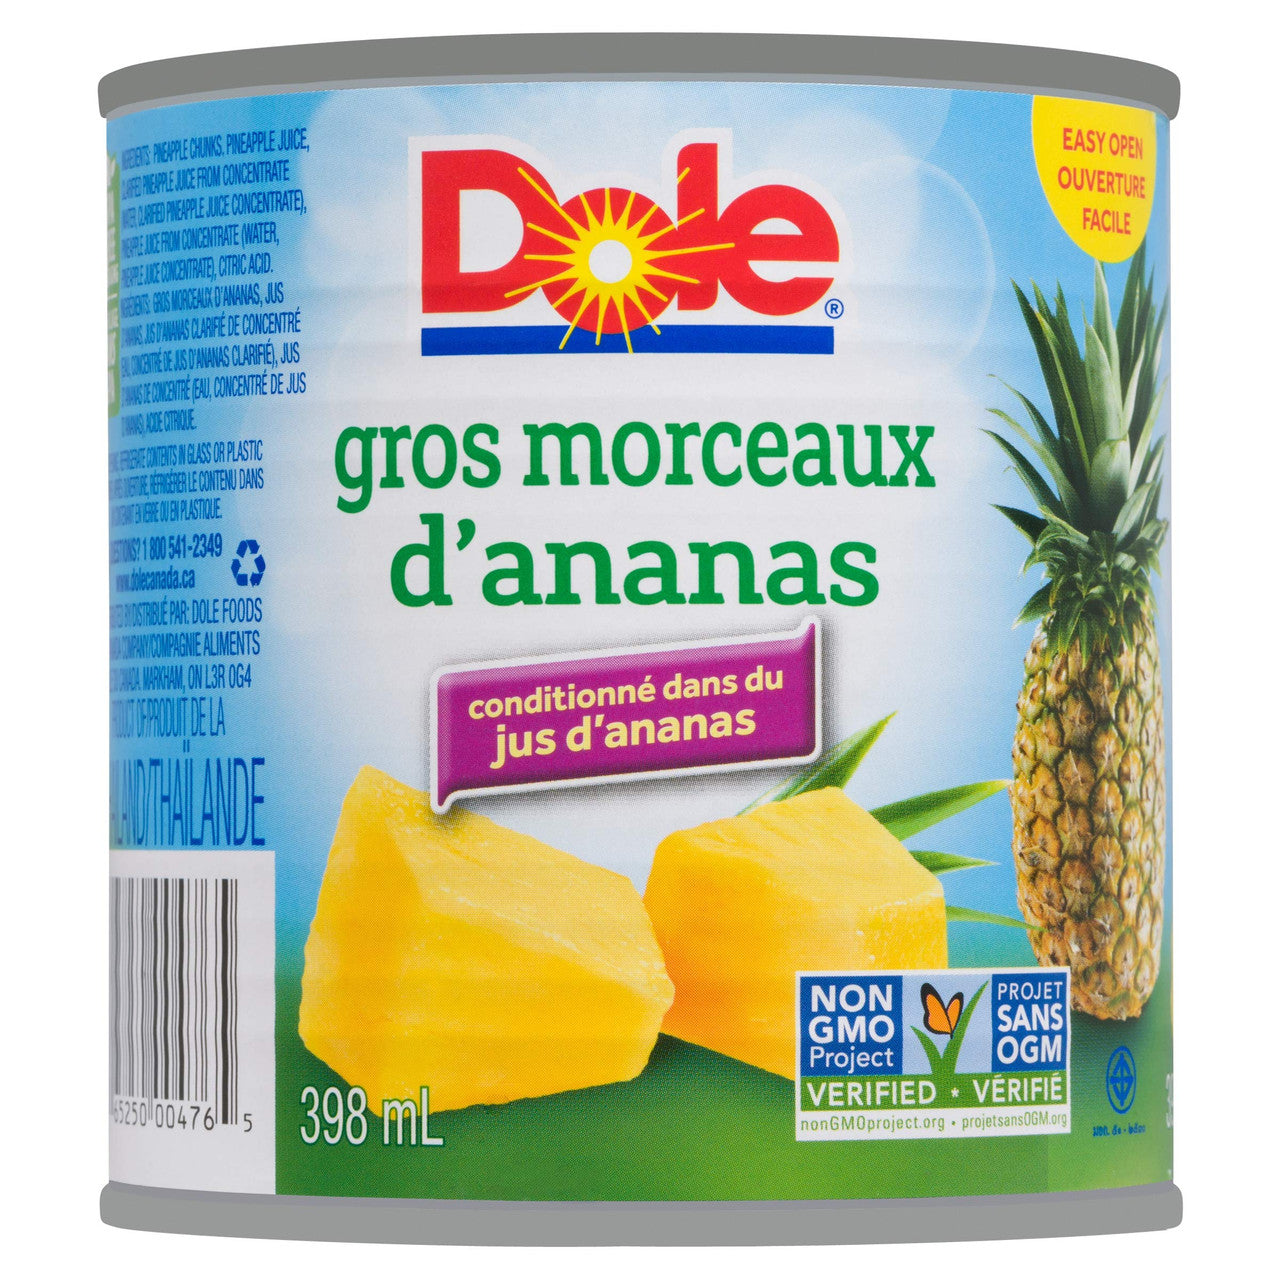 Dole Pineapple Chunks 398 ml/13.5 oz., Can {Imported from Canada}